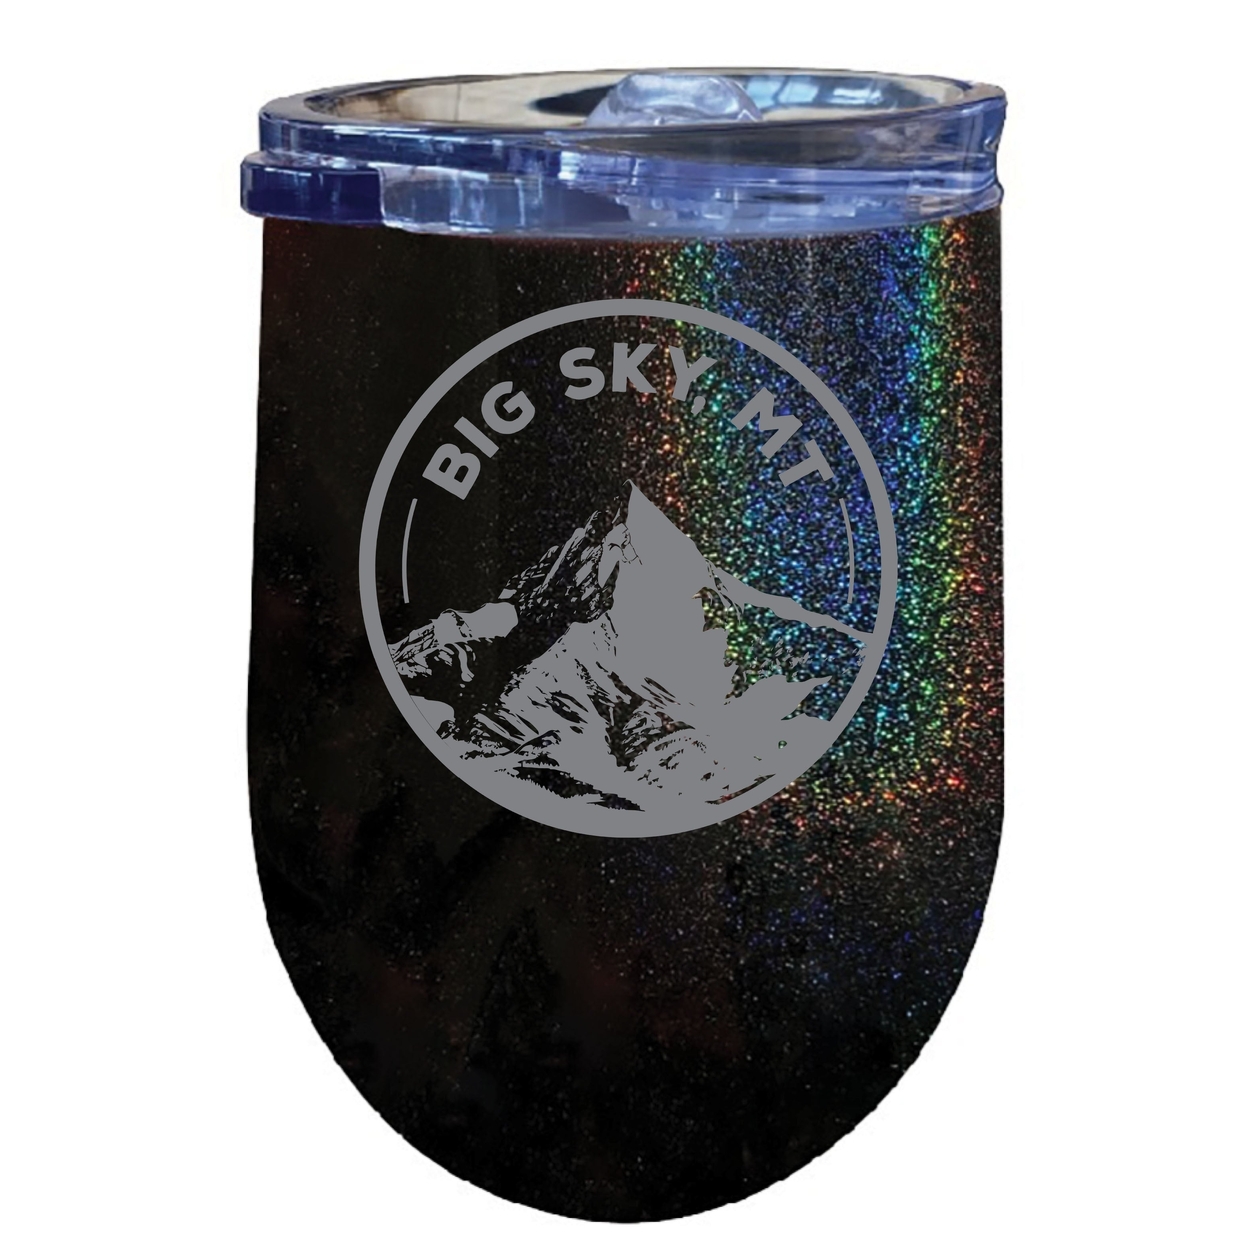 Big Sky Montana Souvenir 12 Oz Engraved Insulated Wine Stainless Steel Tumbler - White,,4-Pack